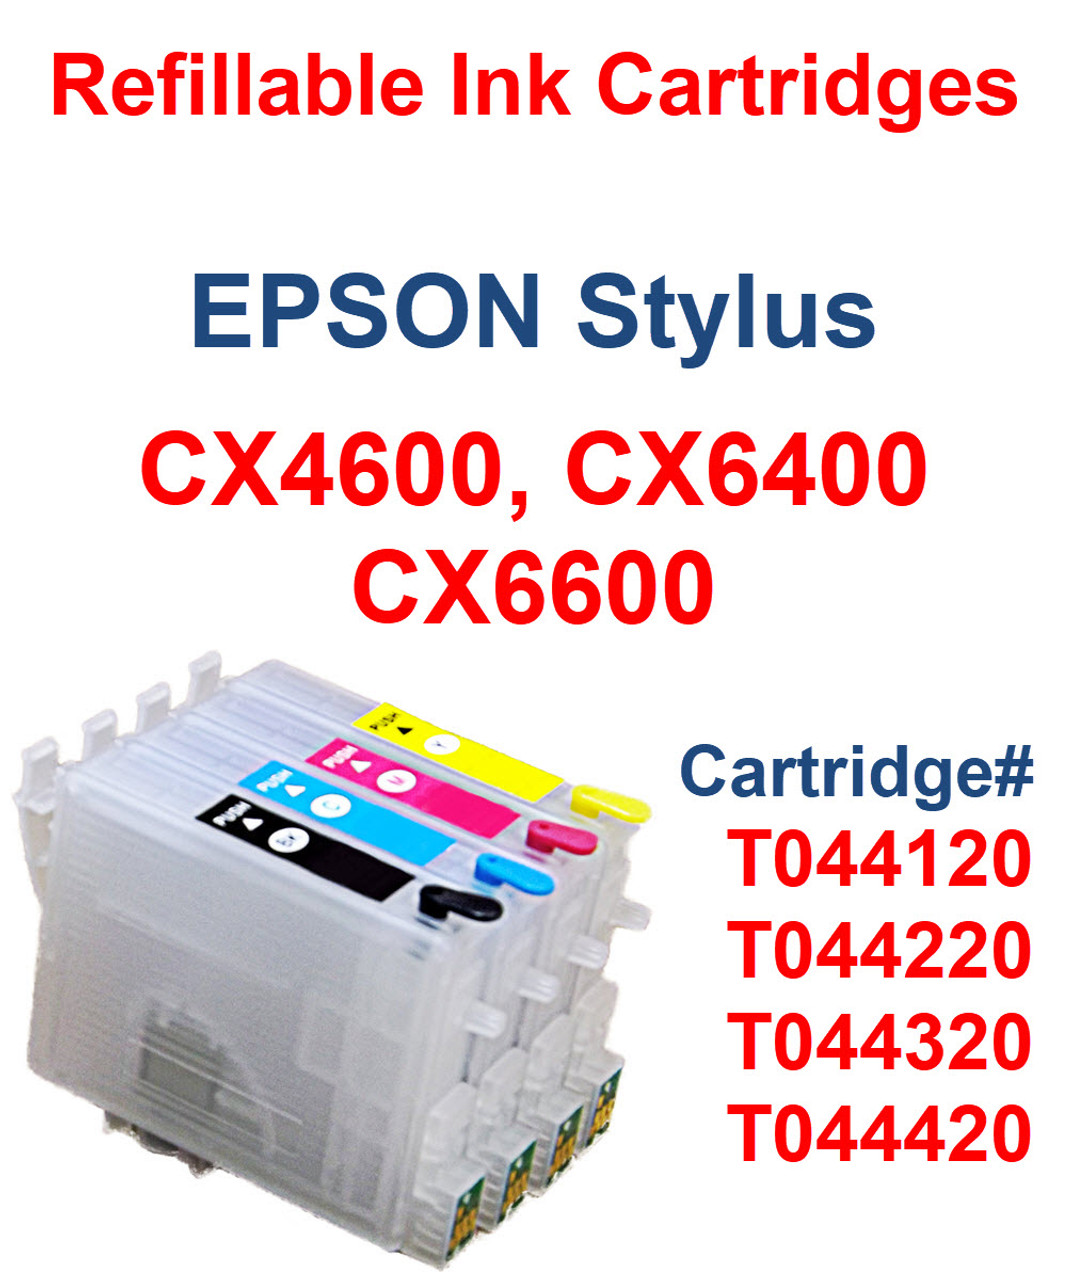 4- Refillable Ink Cartridges with auto reset chips for Epson Stylus CX4600 CX6400 CX6600 printers